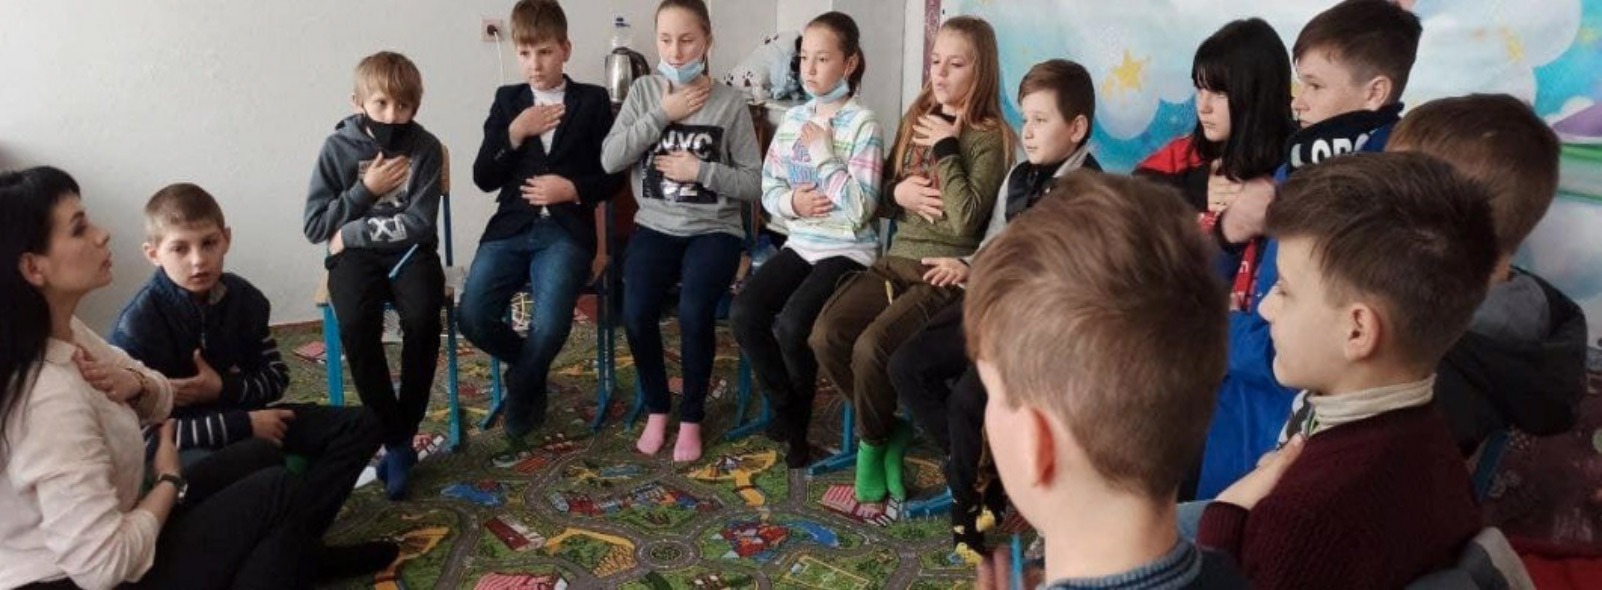 “Helping Hand for Ukraine” International Relief Project Provides psychological assistance for traumatized children